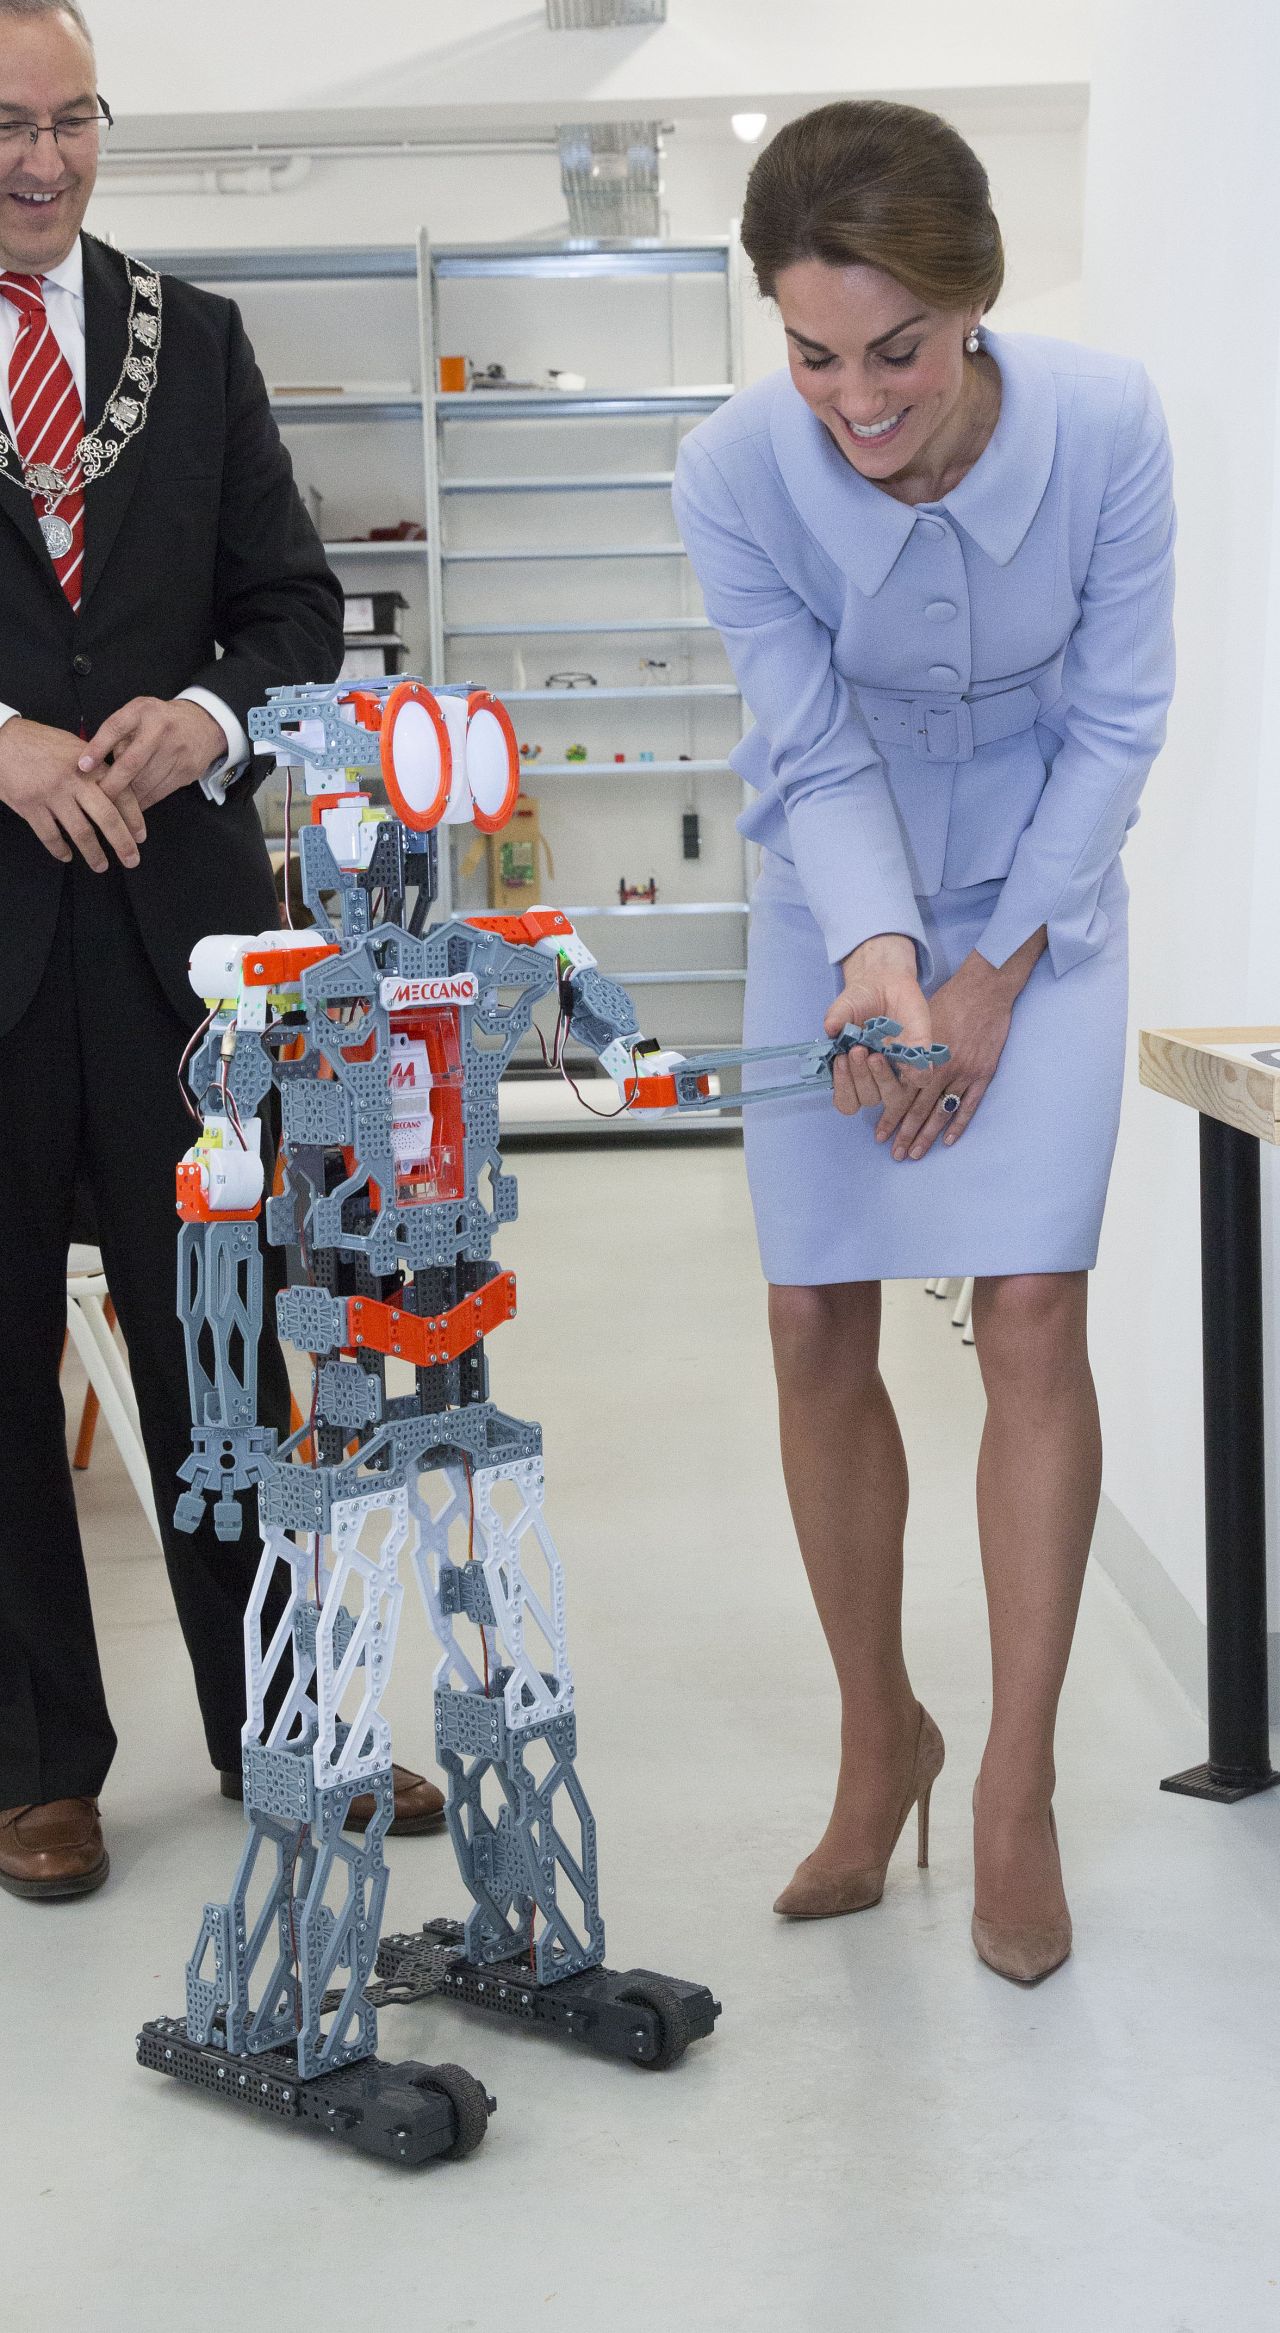 kate-middleton-robotics-class-at-bouwkeet-workshop-project-for-teenagers-in-rotterdam-nl-10-11-2016-1.jpg